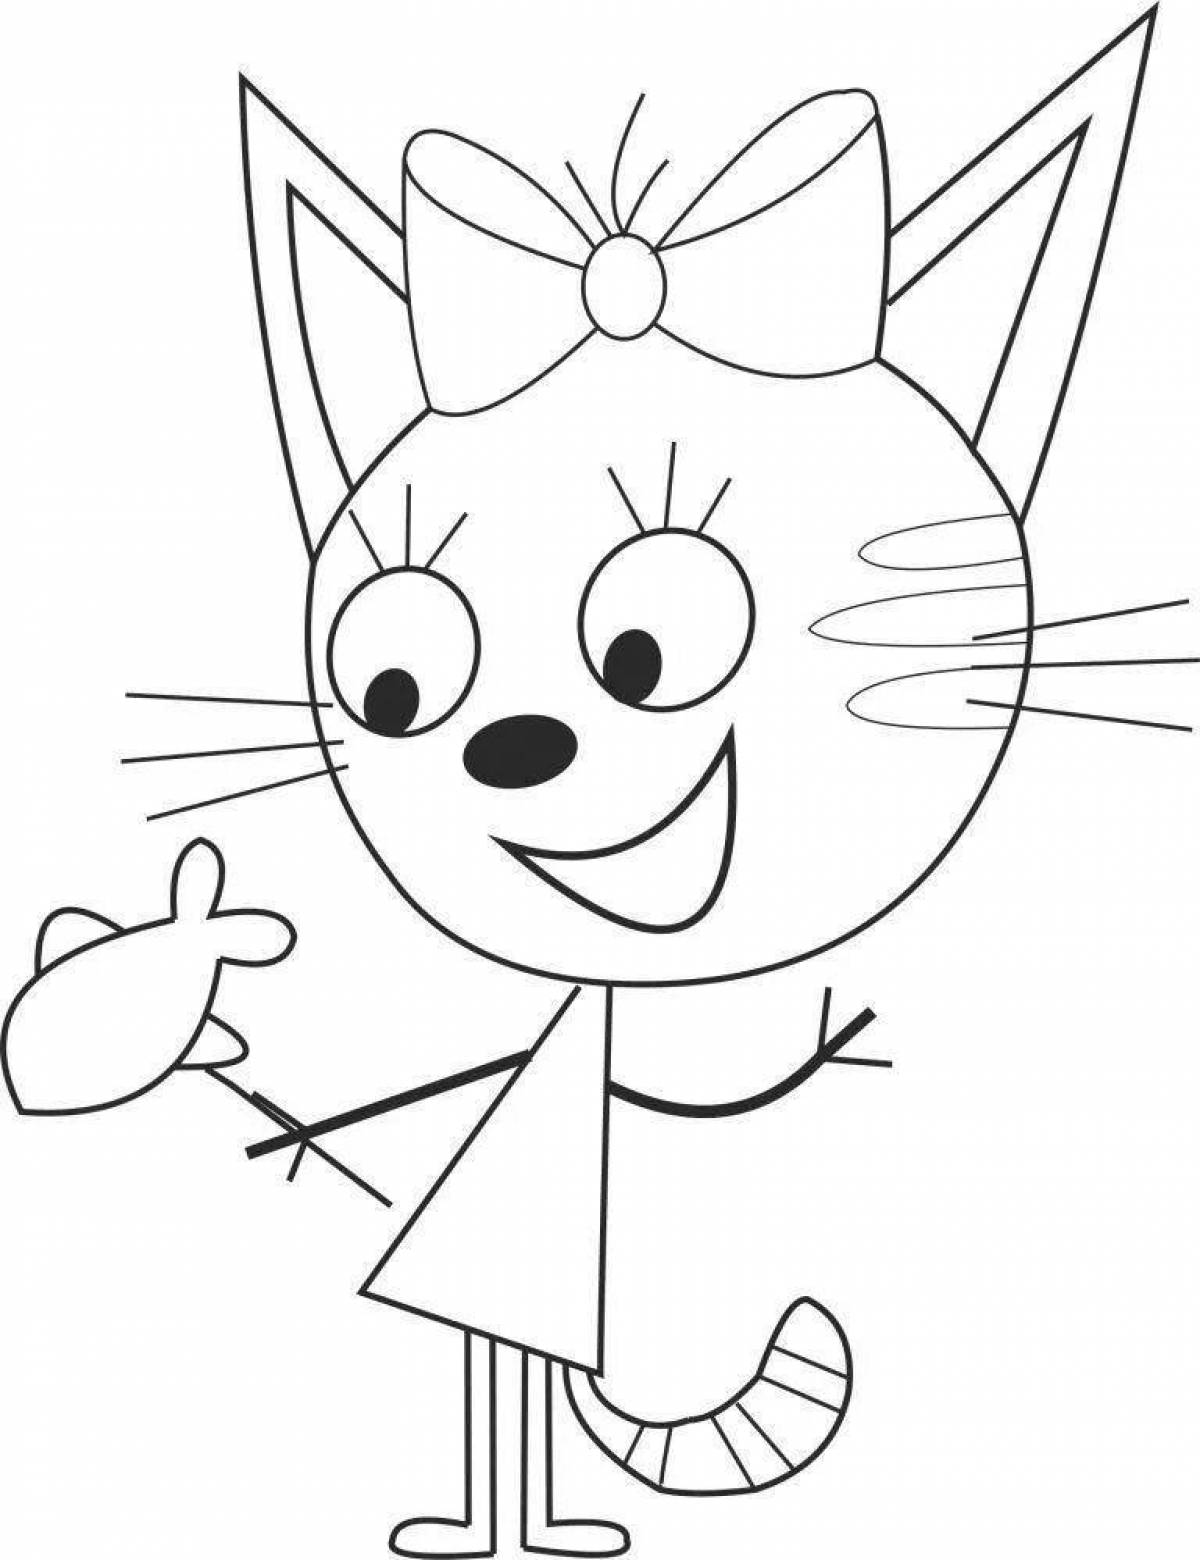 Fun 3 cats coloring page for babies